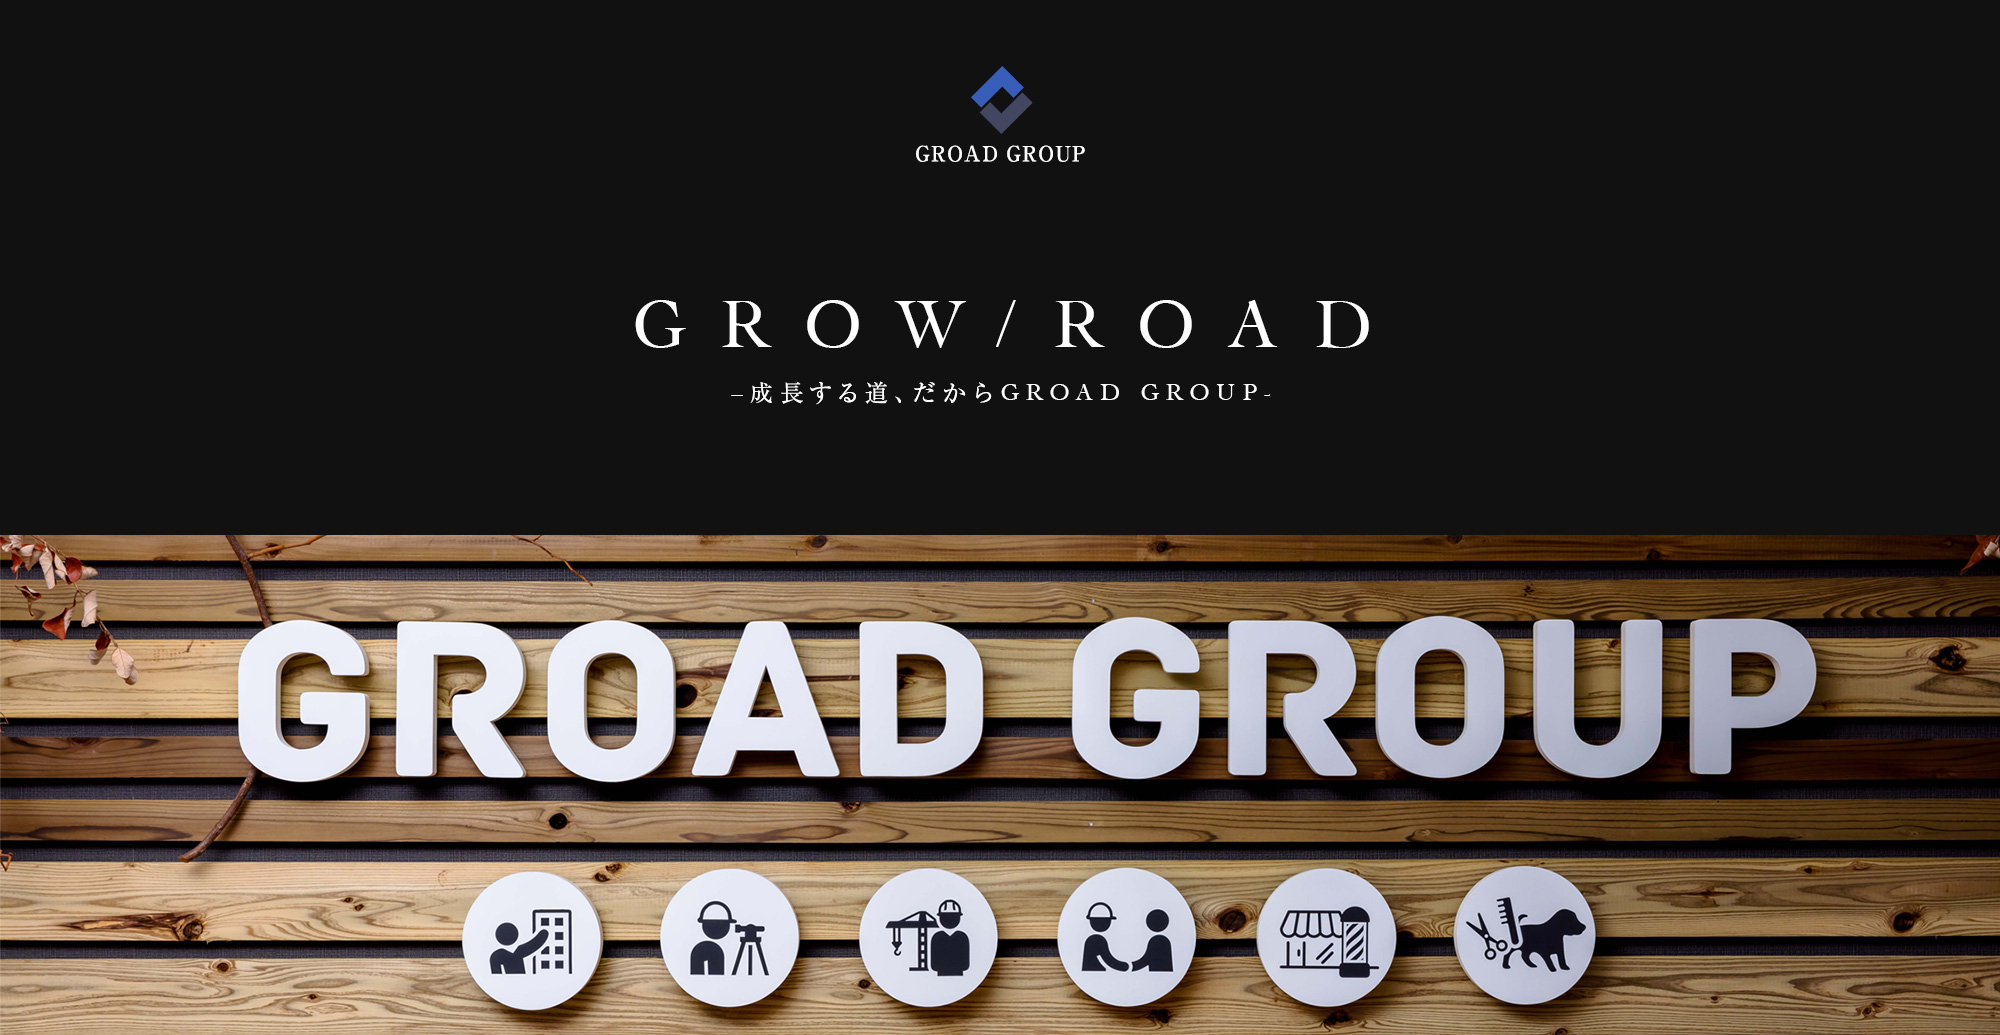 GROAD GROUP